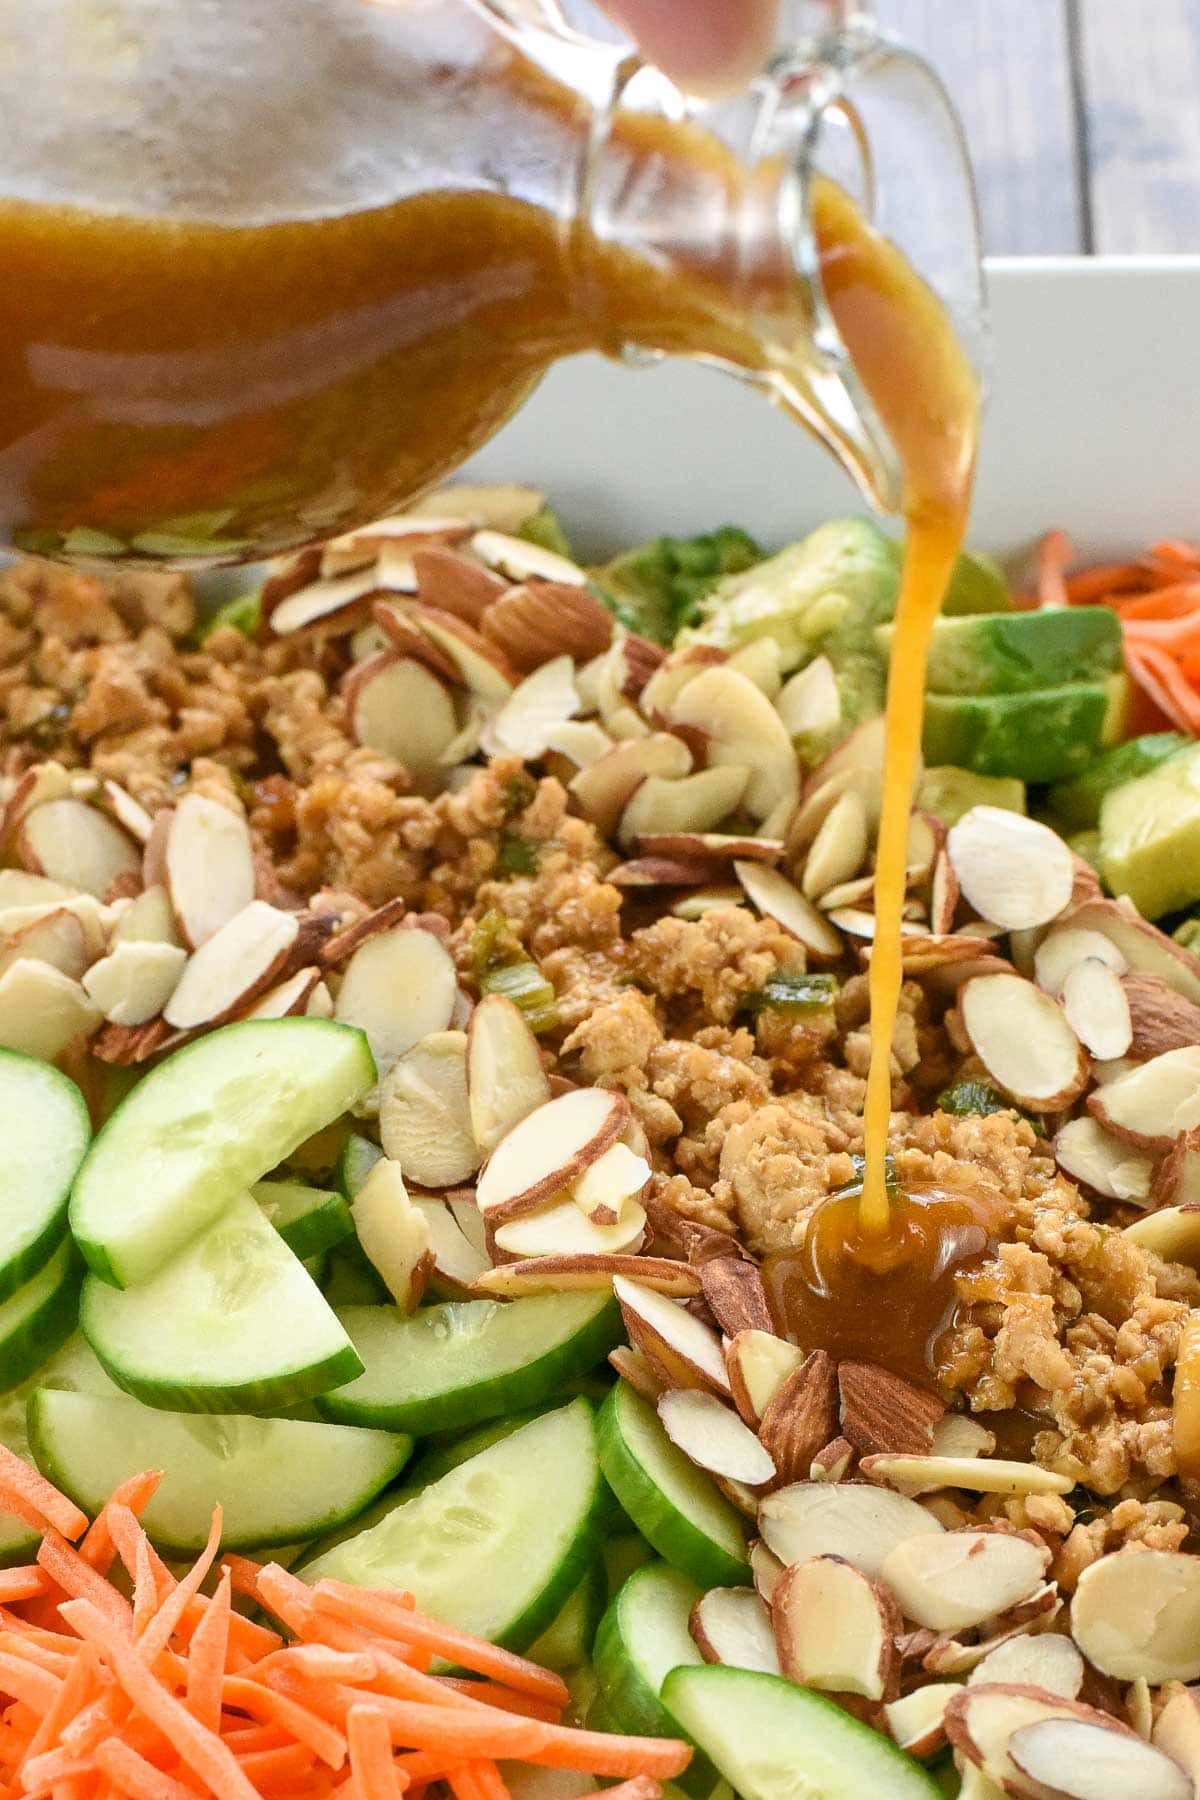 Pouring Asian Salad Dressing recipe over salad.